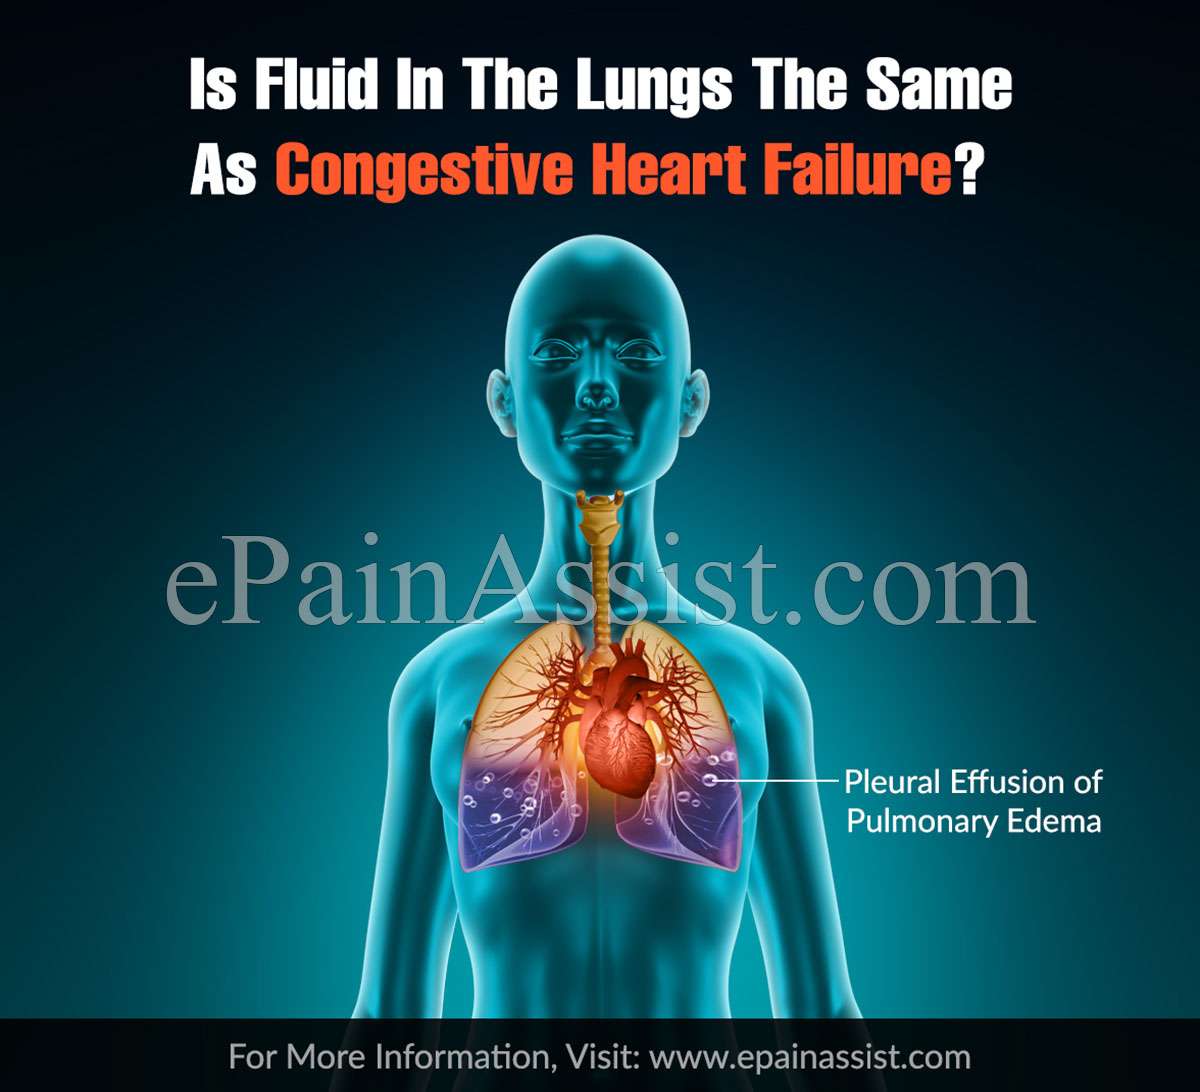 Is Fluid In The Lungs The Same As Congestive Heart Failure?